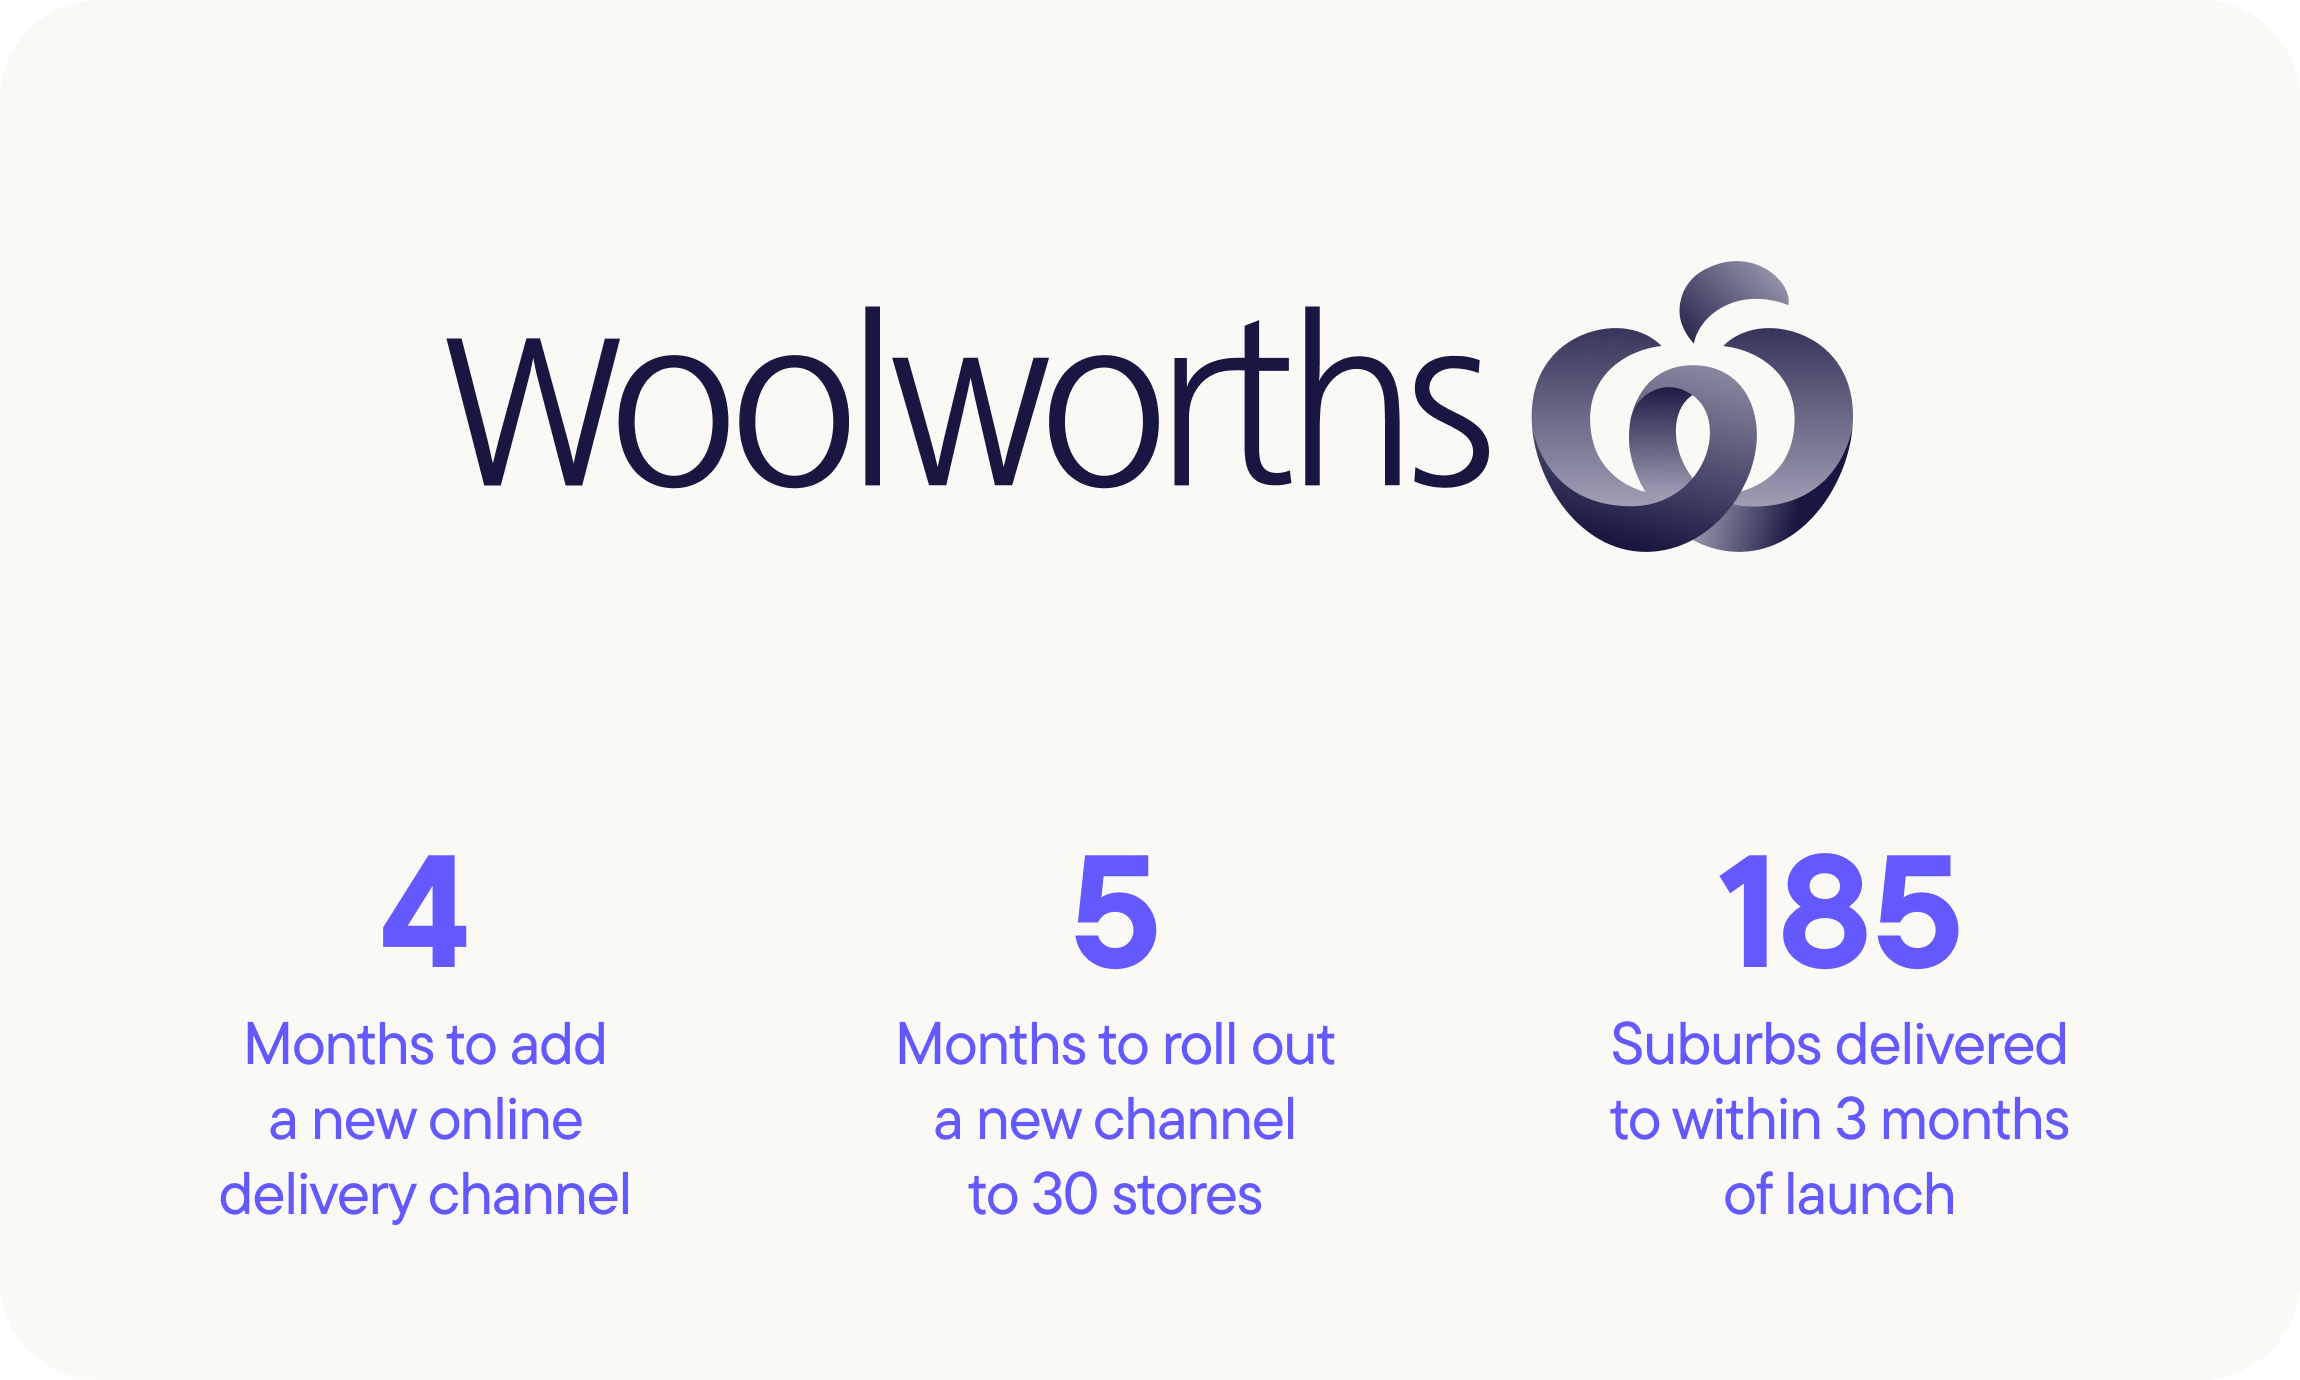 Woolworths customer story